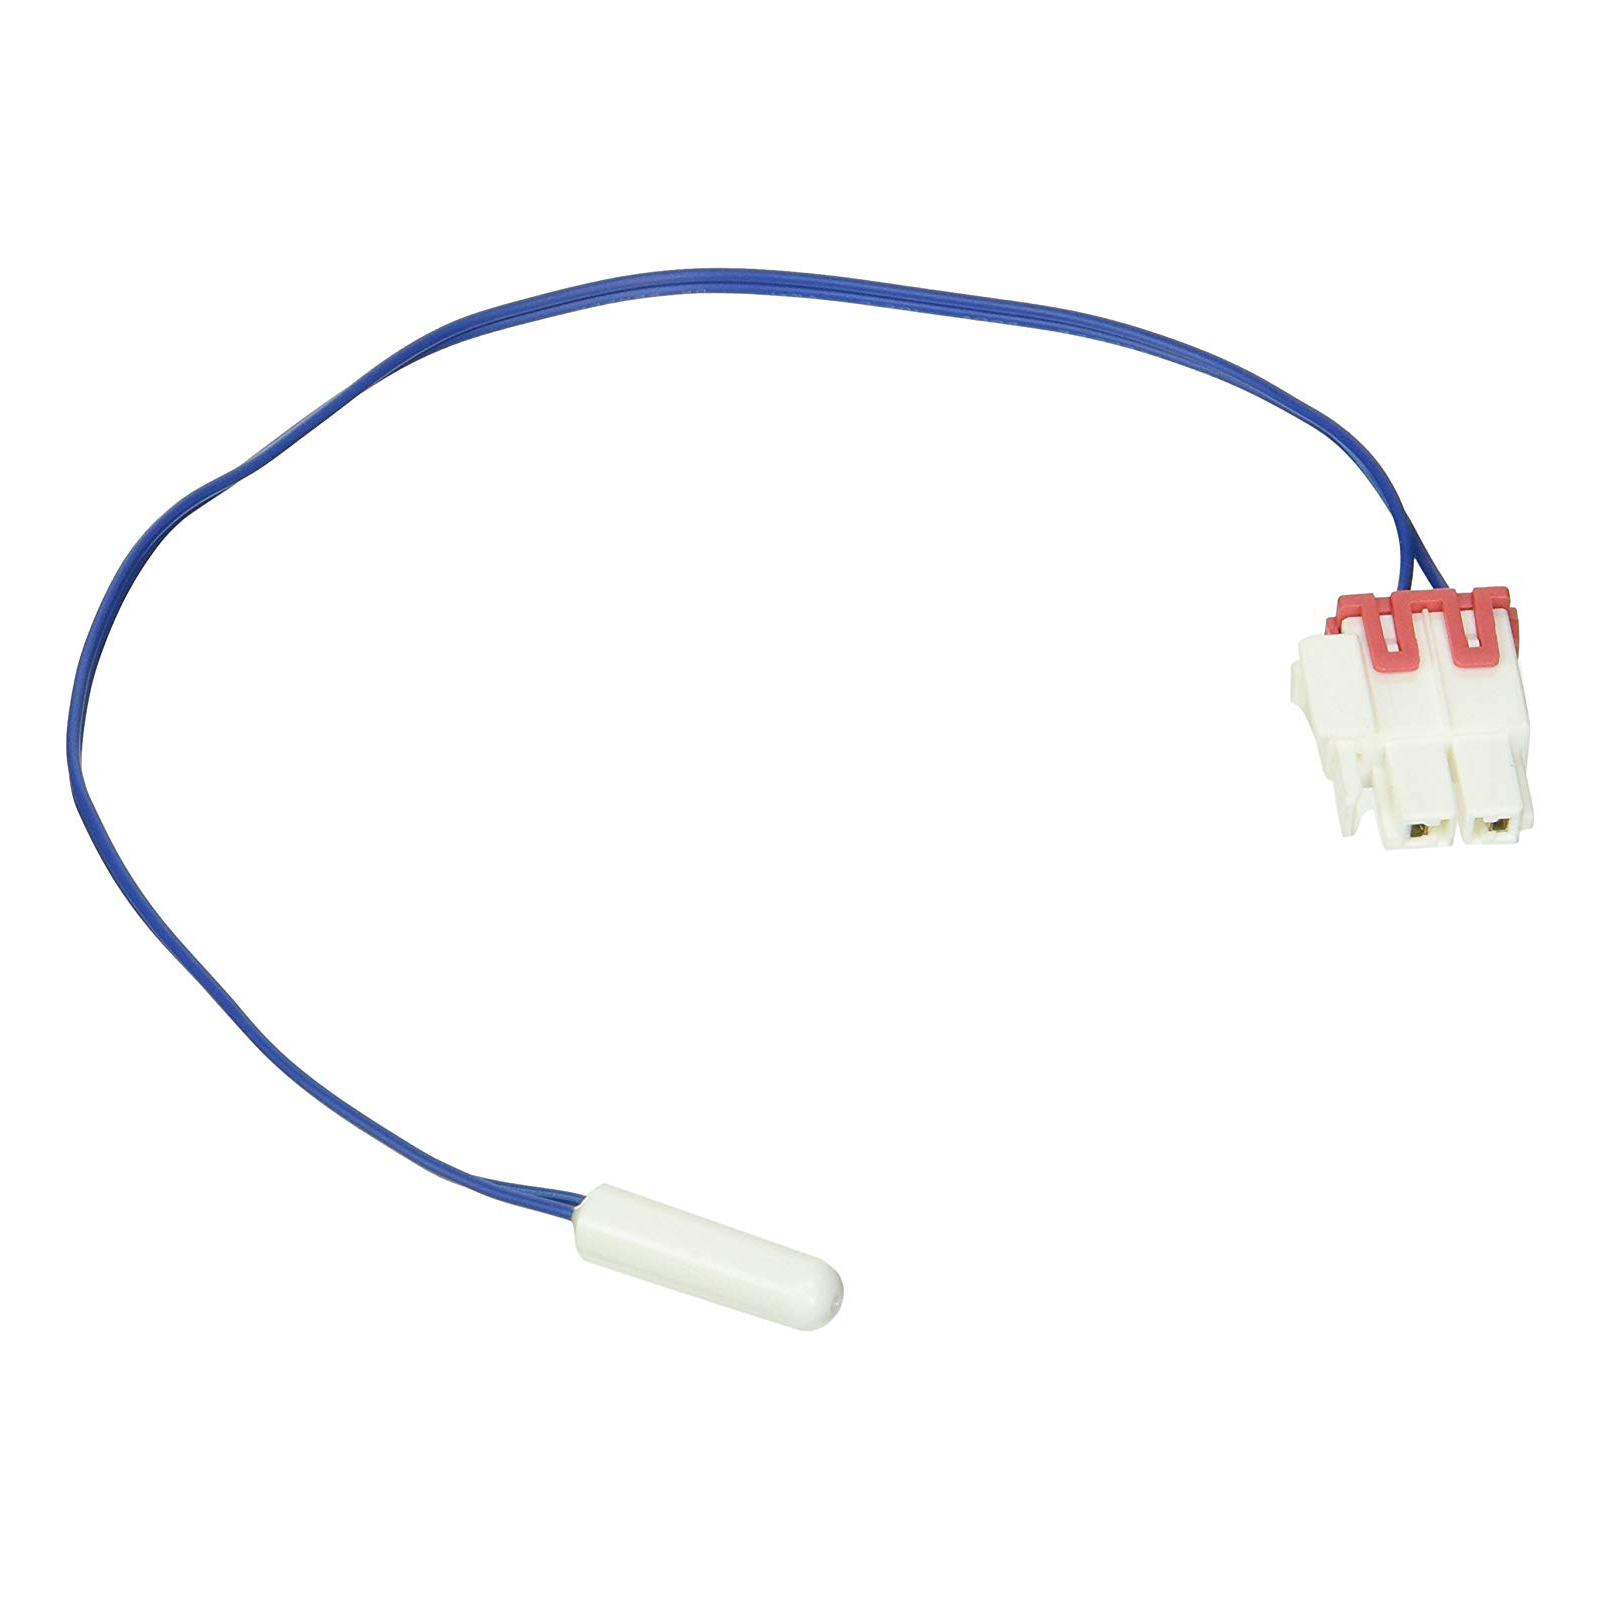 https://www.genuinereplacementparts.com/images/appliance_parts/samsung-rs261mdwp-xaa-defrost-temperature-sensor-upper-genuine-oem.jpg